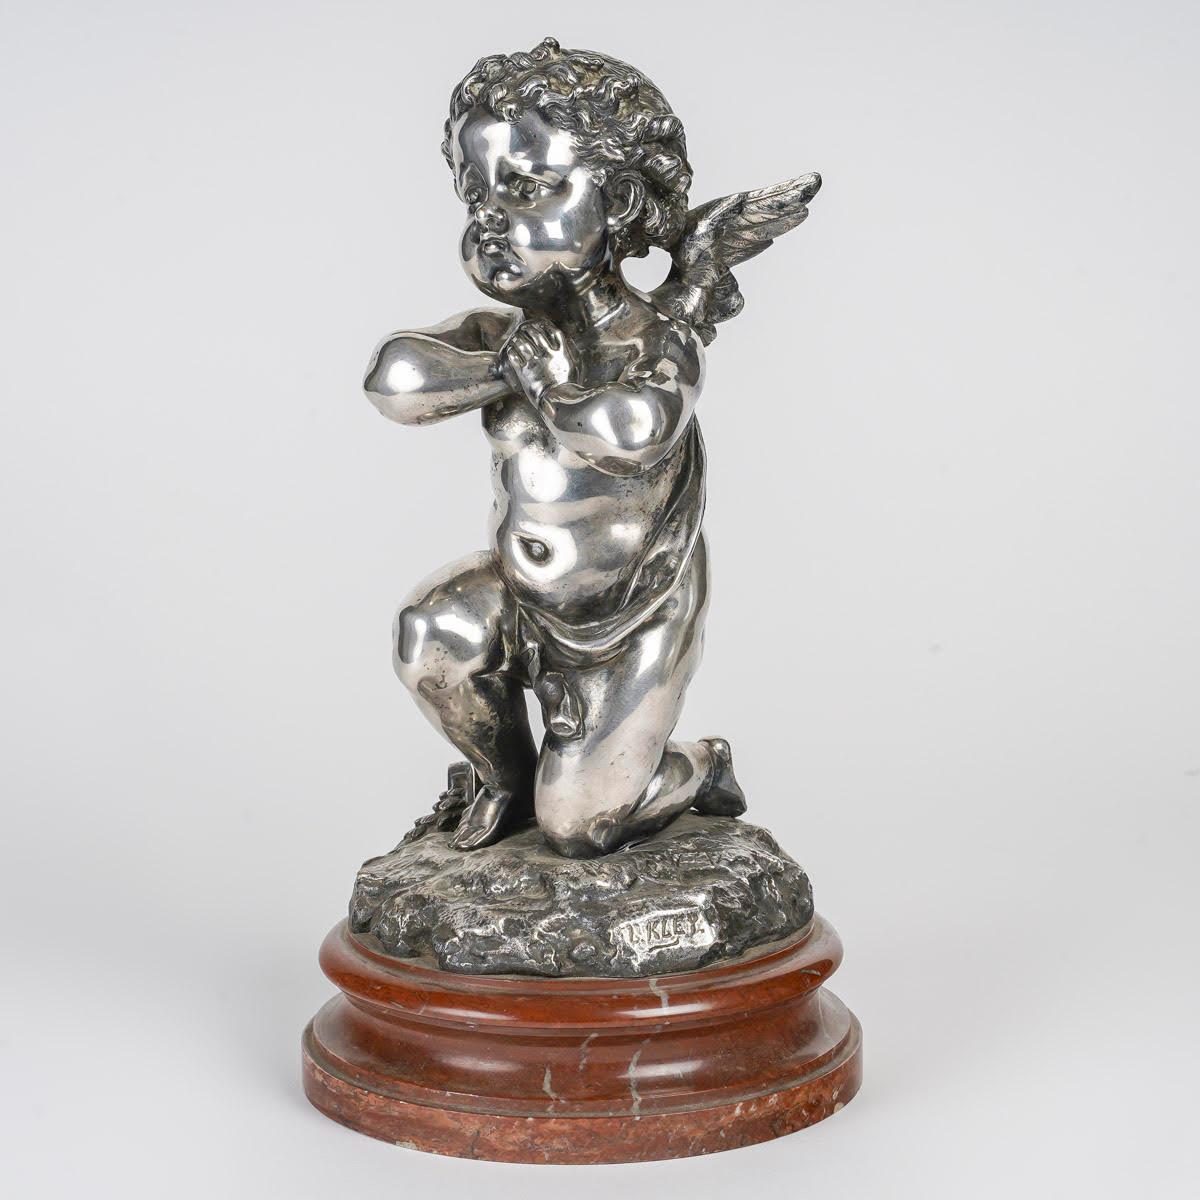 Silvered bronze sculpture by Louis Kley, 19th Century, Napoleon III period.

Napoleon III period sculpture, circa 1877 by Louis Kley, representing an Angelot in silvered bronze, red marble base.
h: 33cm, d: 17cm